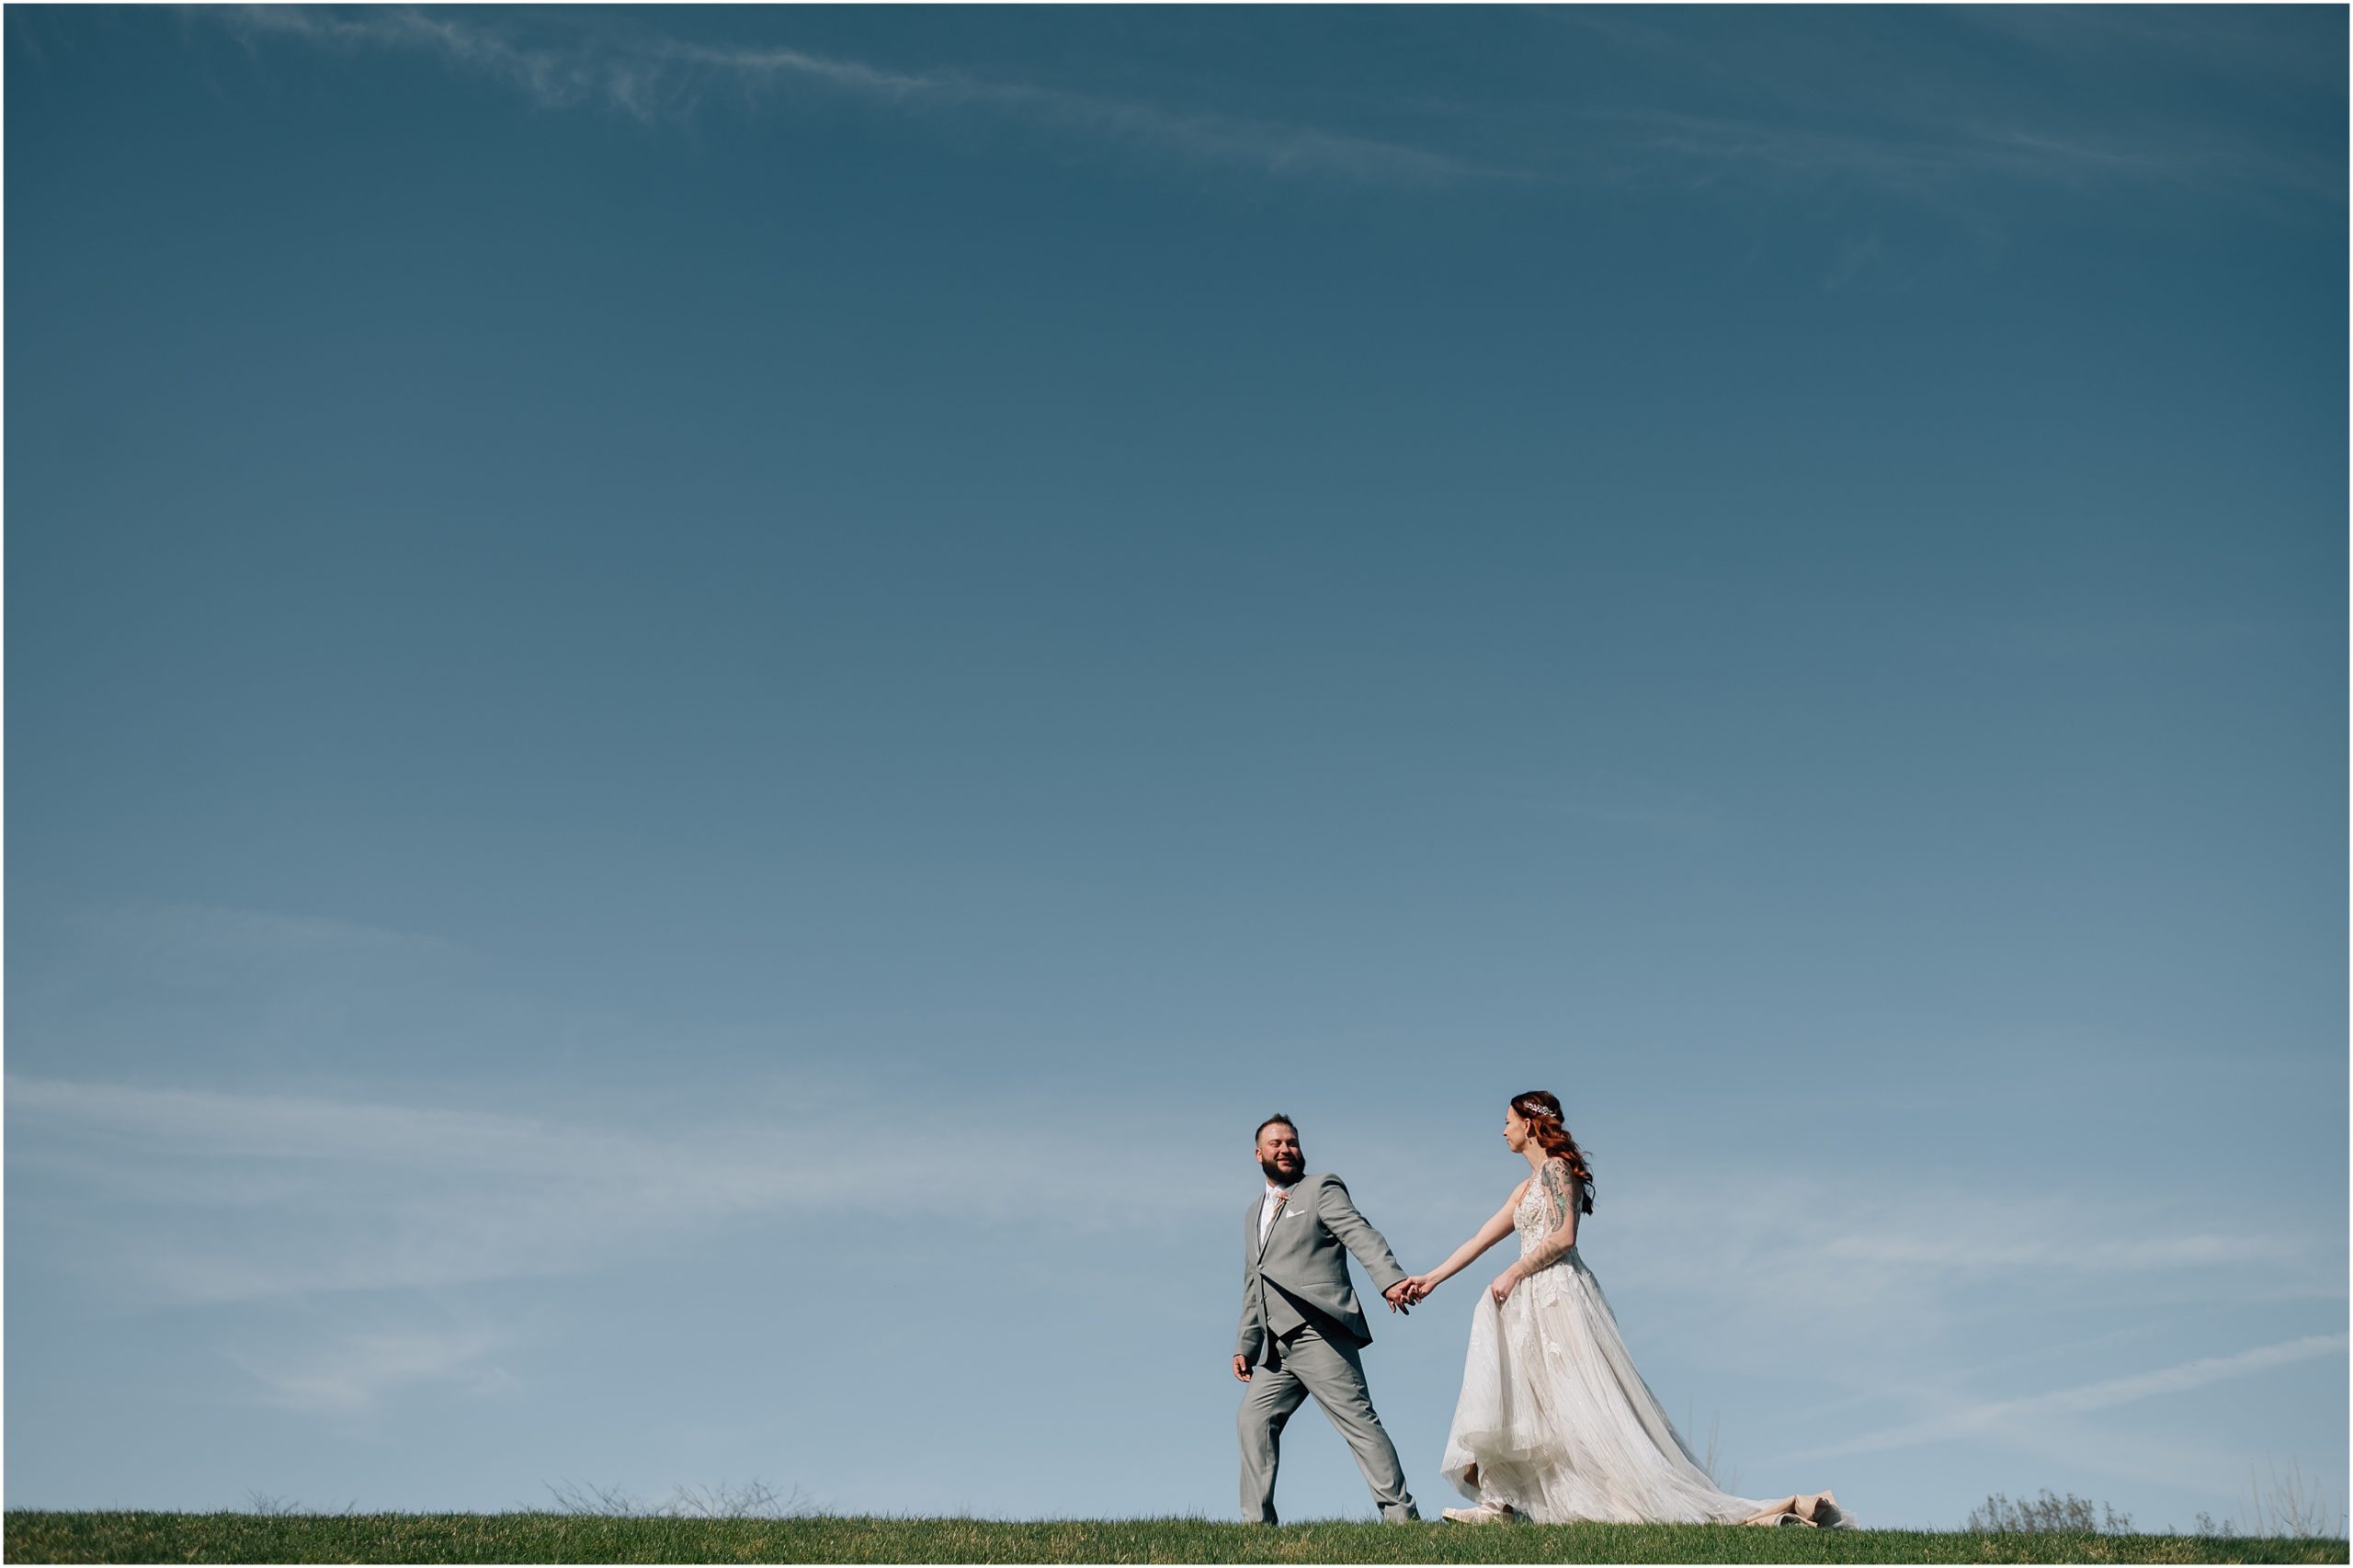 Bride in white dress with train and Groom in light grey suit walk on top of a hill with blue sky in the background at Honey Creek Resort on Rathbun Lake in Iowa. Photo by Anna Brace, who specializes in Omaha NE wedding photography.